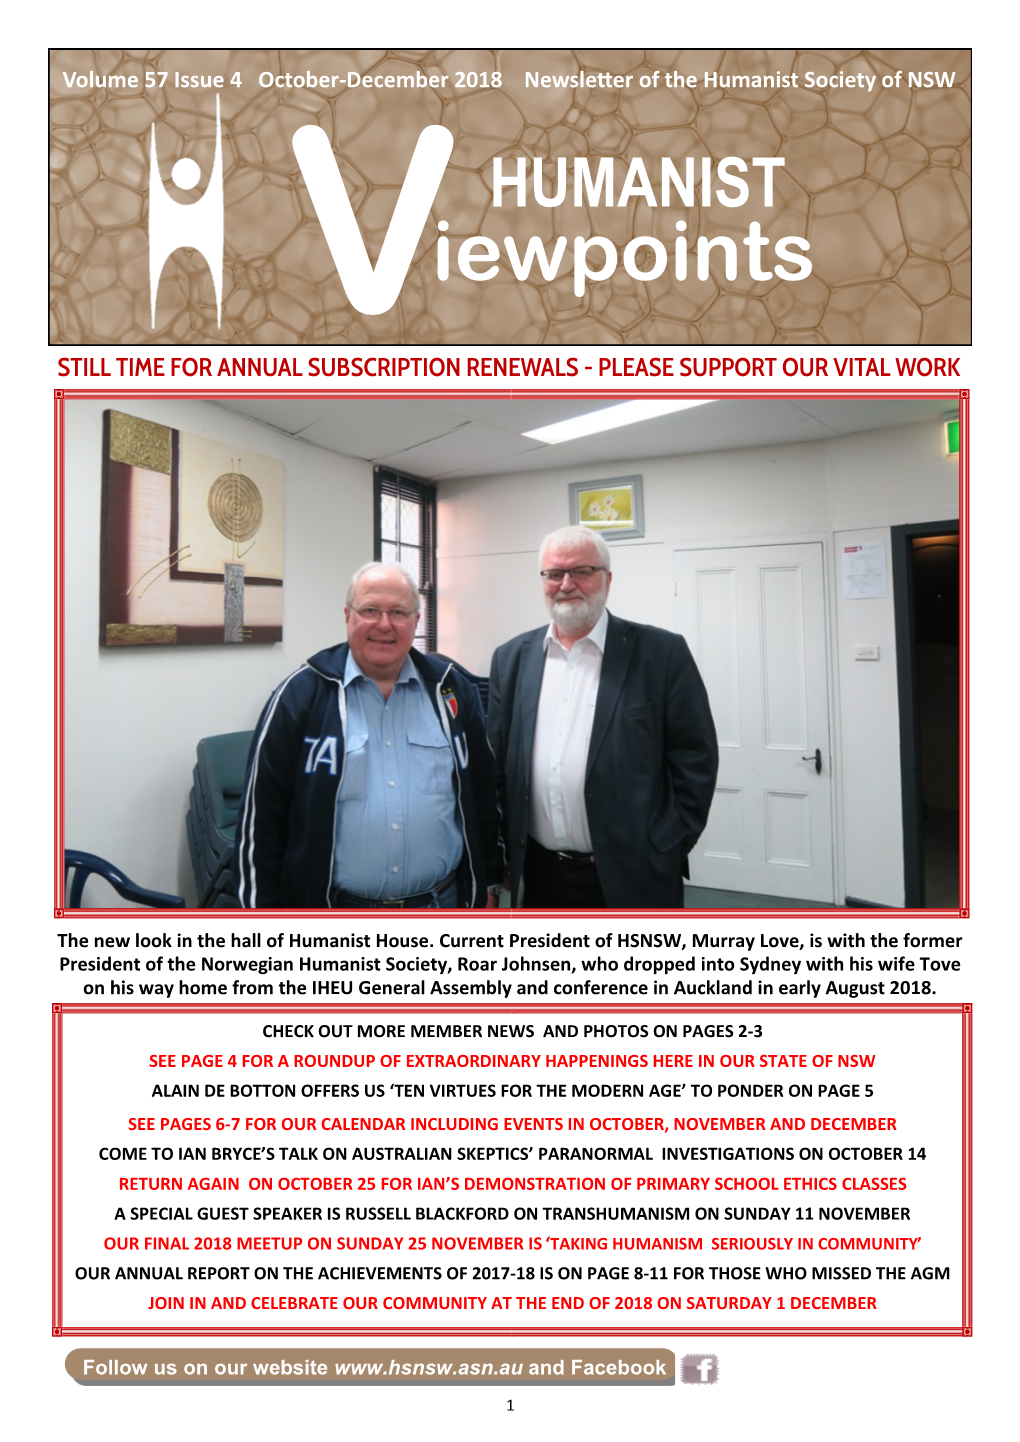 Iewpoints STILL TIME for ANNUAL SUBSCRIPTION RENEWALS - PLEASE SUPPORT OUR VITAL WORK